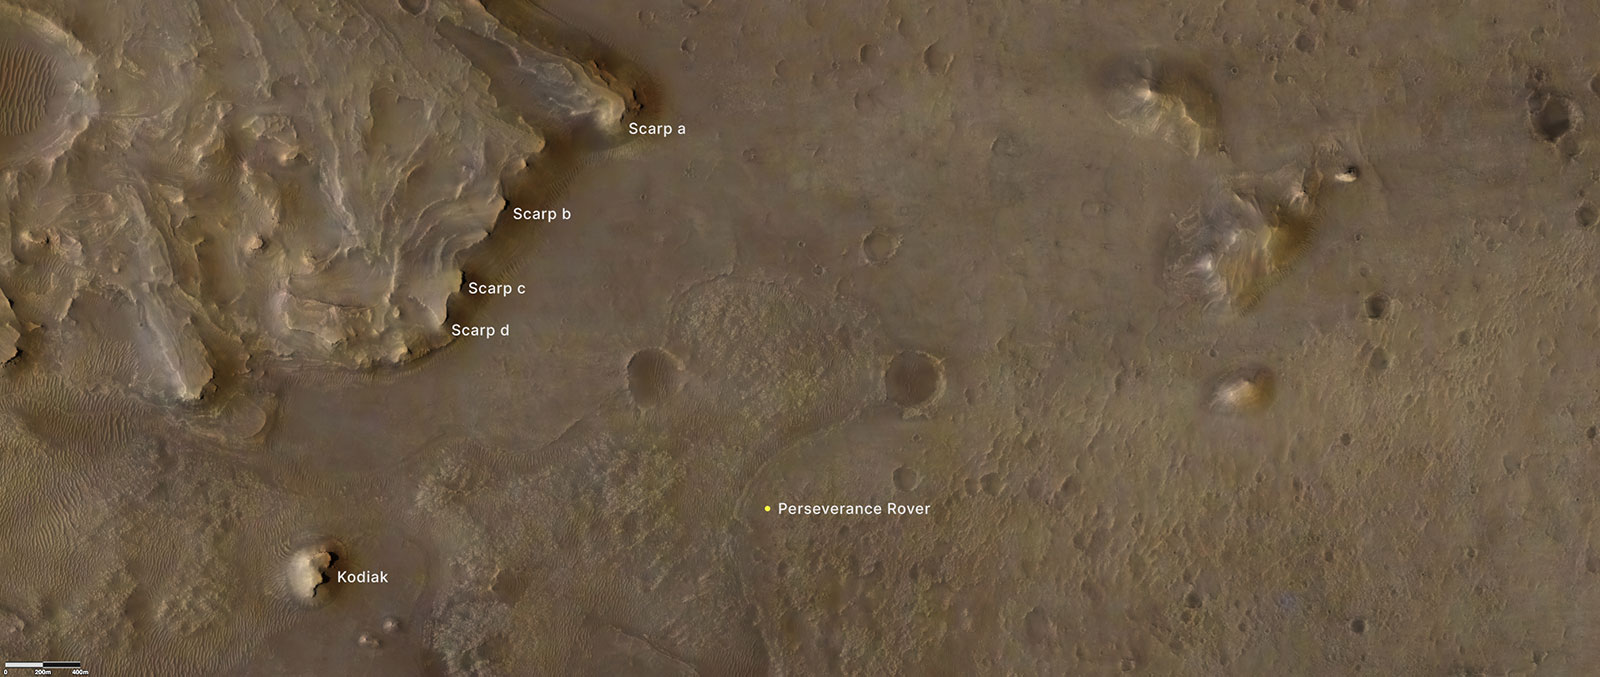 This annotated image indicates the locations of NASA’s Perseverance rover (lower right), as well as the “Kodiak” butte (lower left) and several prominent steep banks known as escarpments, or scarps, along the delta of Jezero Crater.